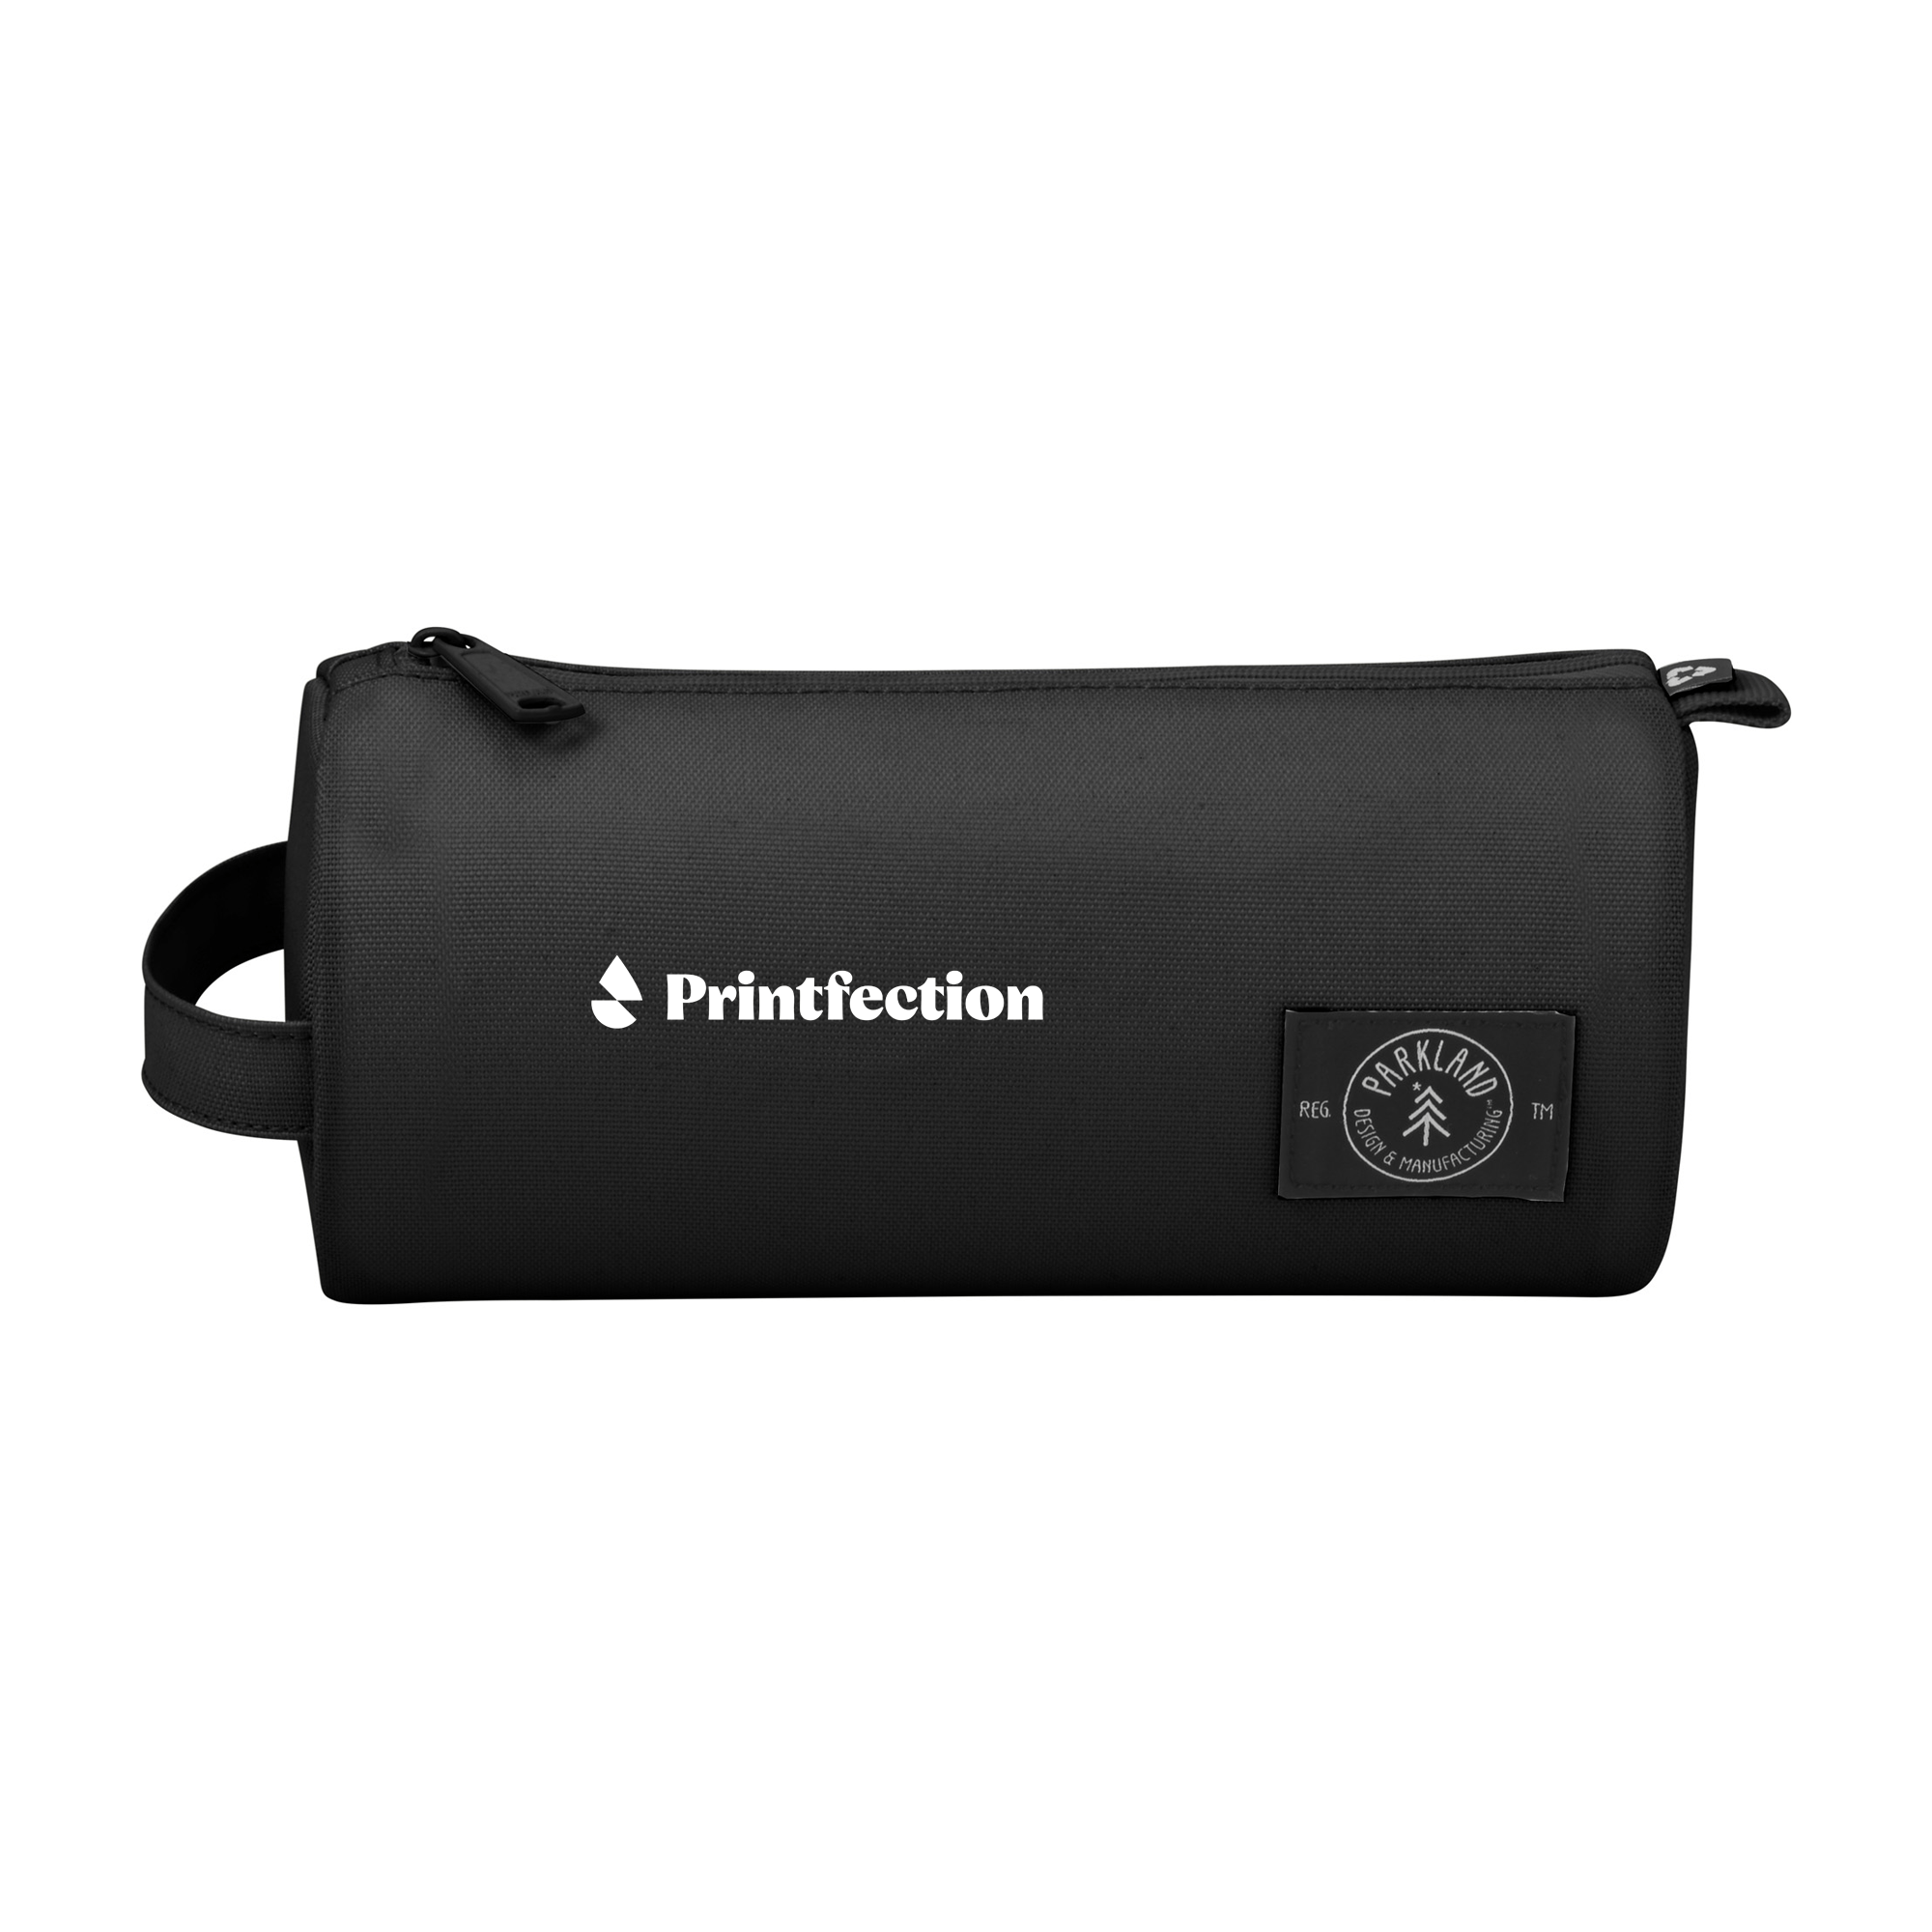 branded corporate merch with logo on pouch